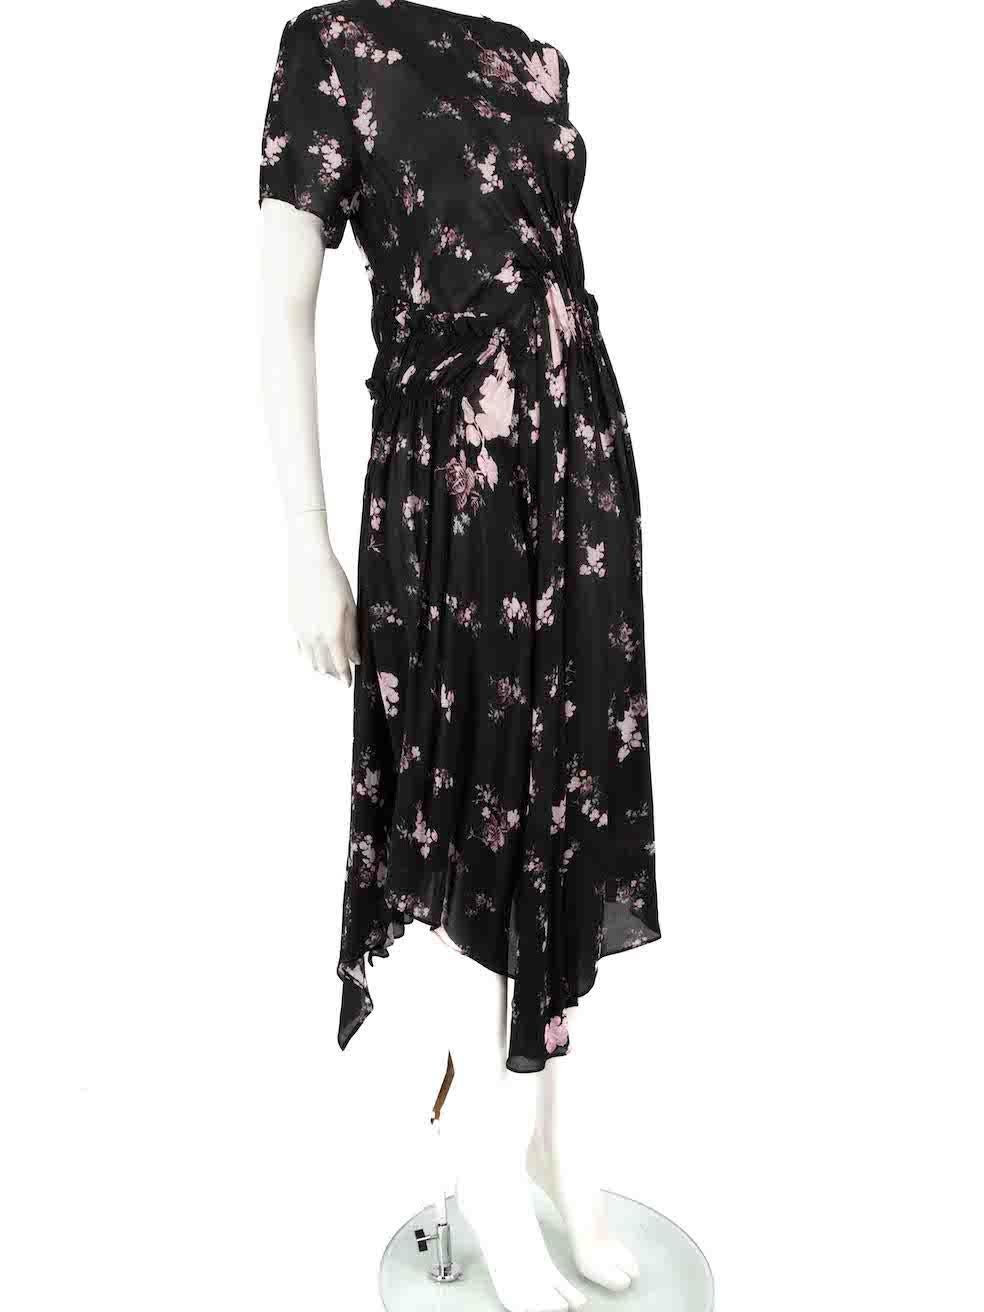 CONDITION is Very good. Hardly any visible wear to dress is evident on this used Preen By Thornton Bregazzi designer resale item.
 
 
 
 Details
 
 
 Black
 
 Viscose
 
 Dress
 
 Pink floral print
 
 Midi
 
 Round neck
 
 Short sleeves
 
 Sheer
 
